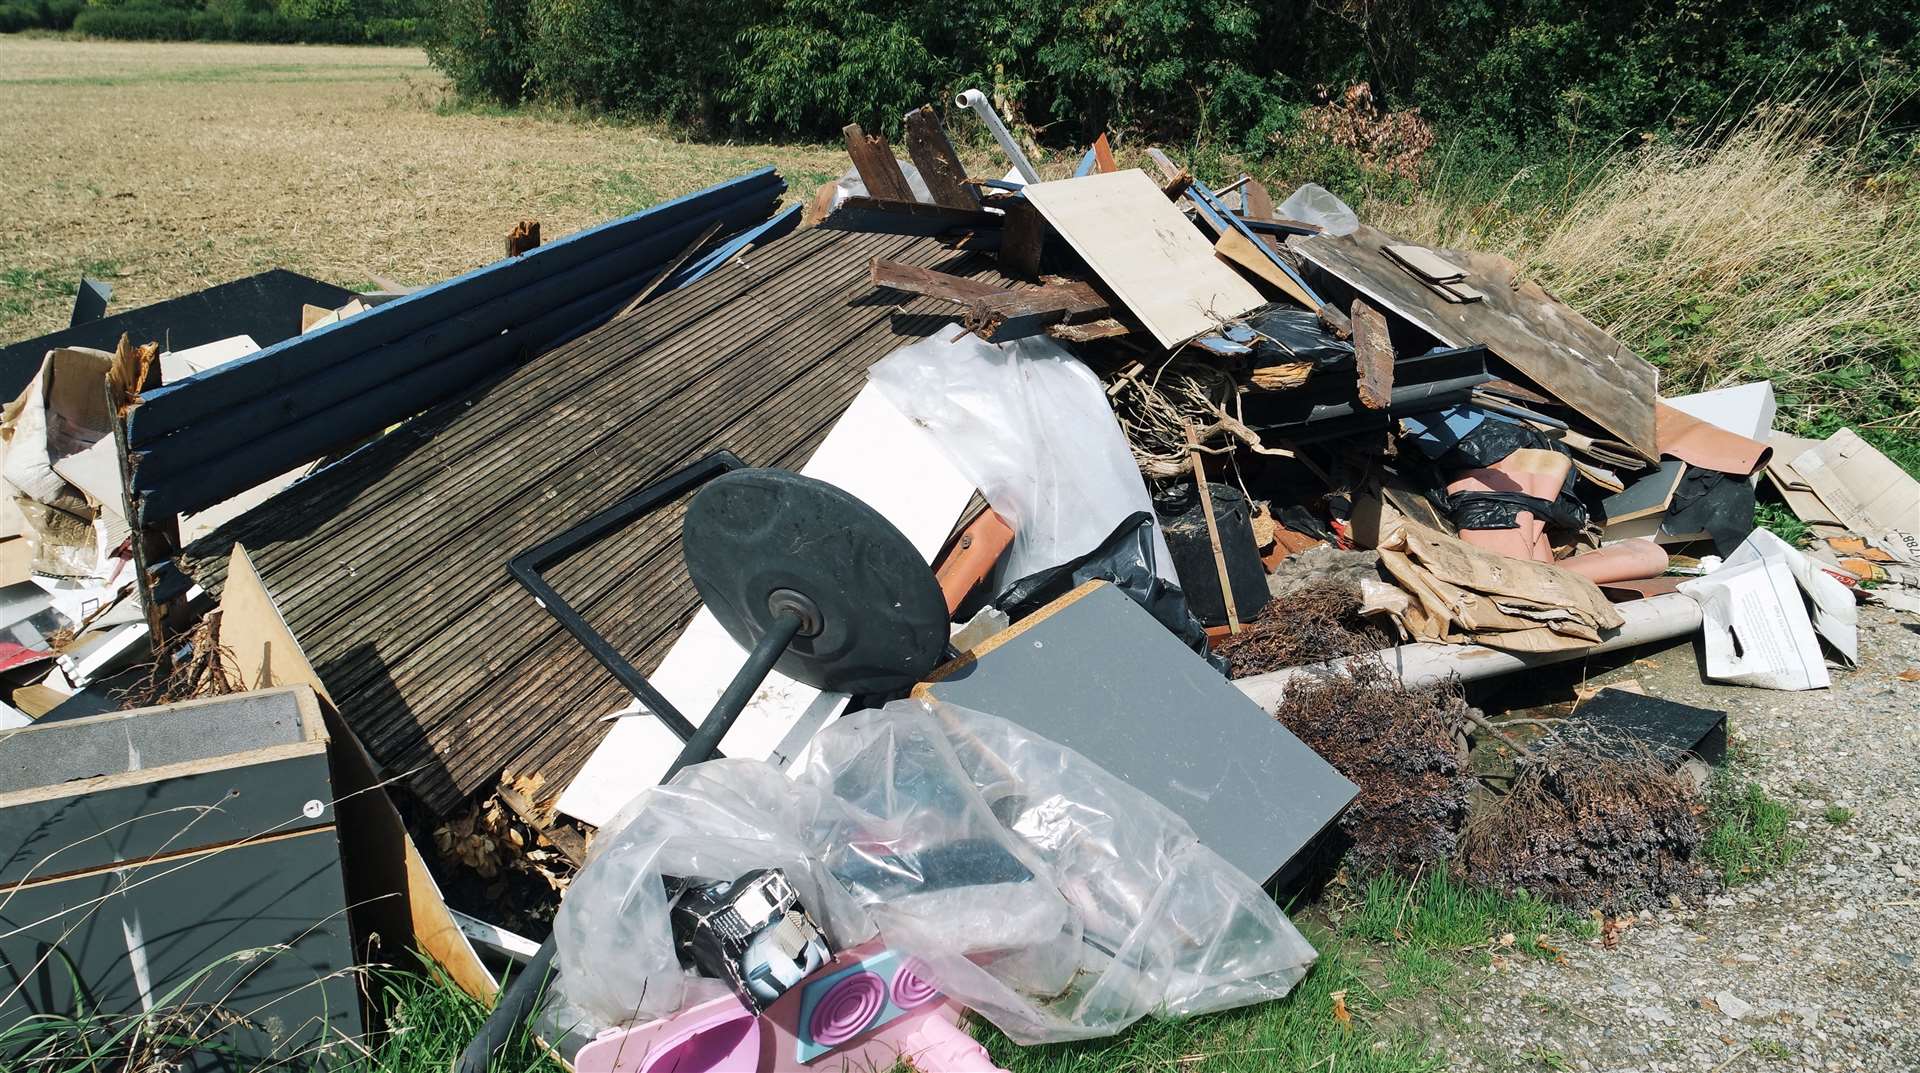 Fly-tipping in Maidstone. Picture: Maidstone Borough Council